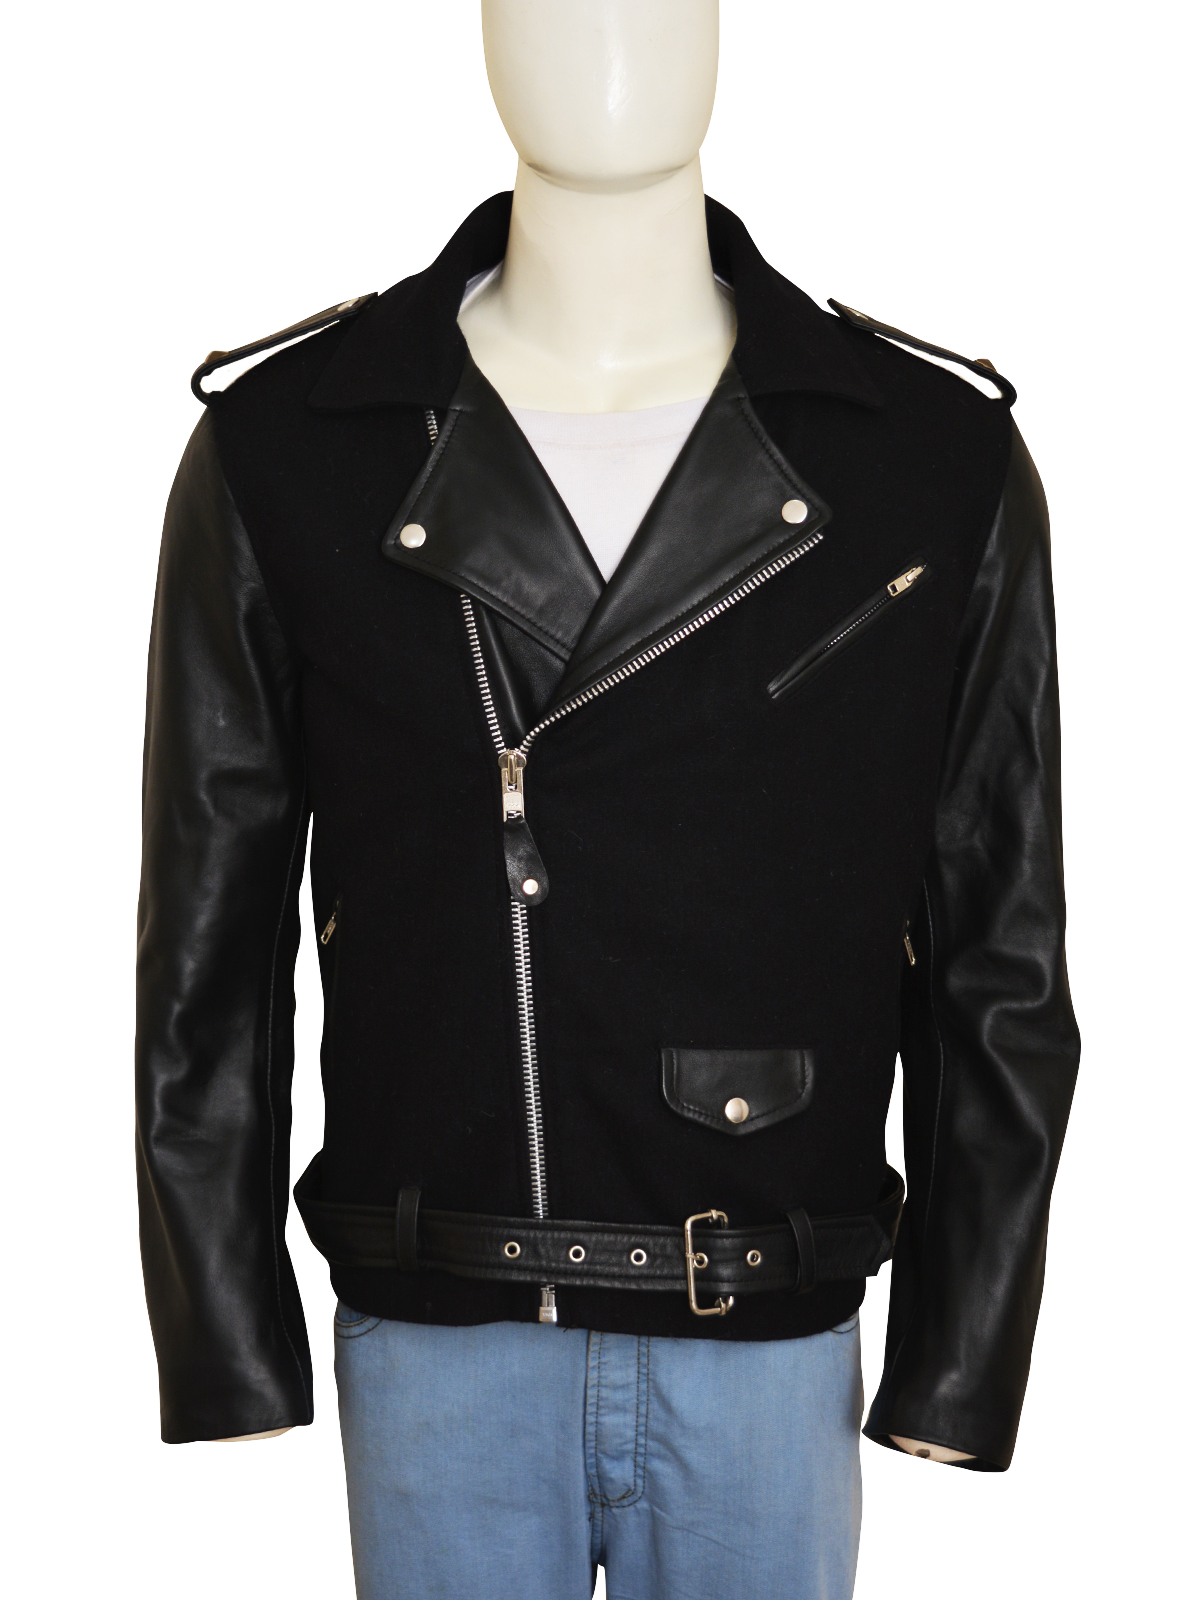 Charming-Wool-And-Leather-Black-Jacket